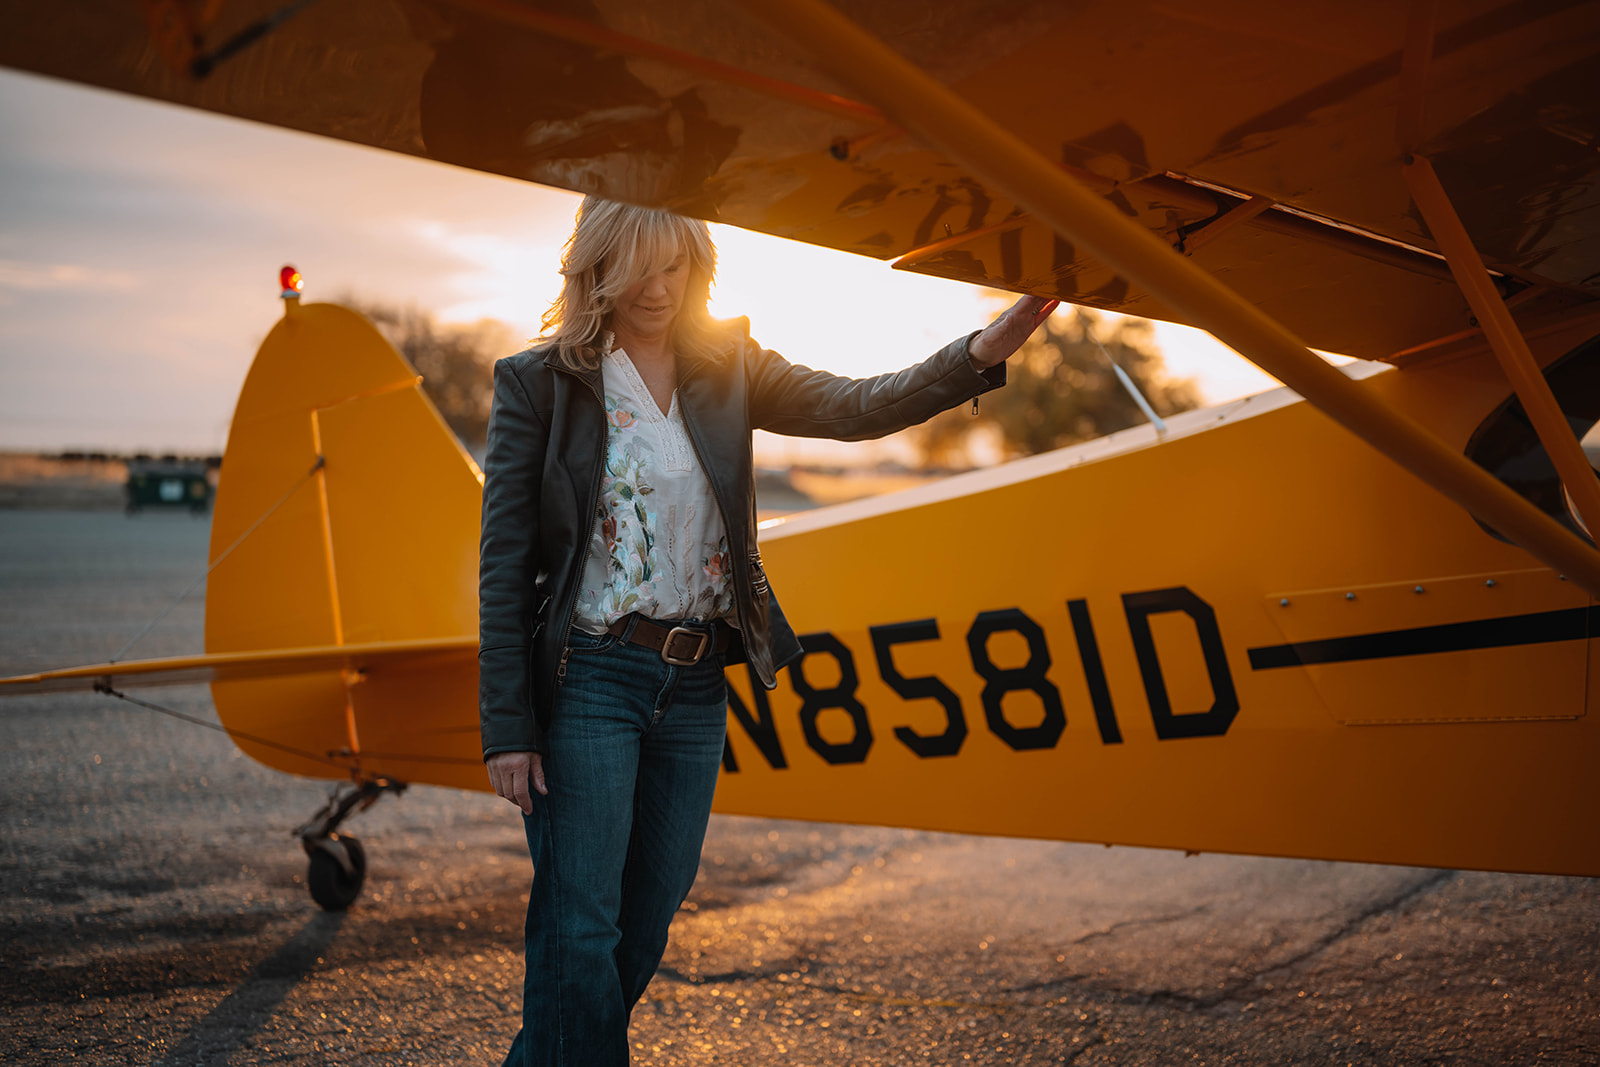 northern california photographer captures lifestyle images for pilots in airplanes